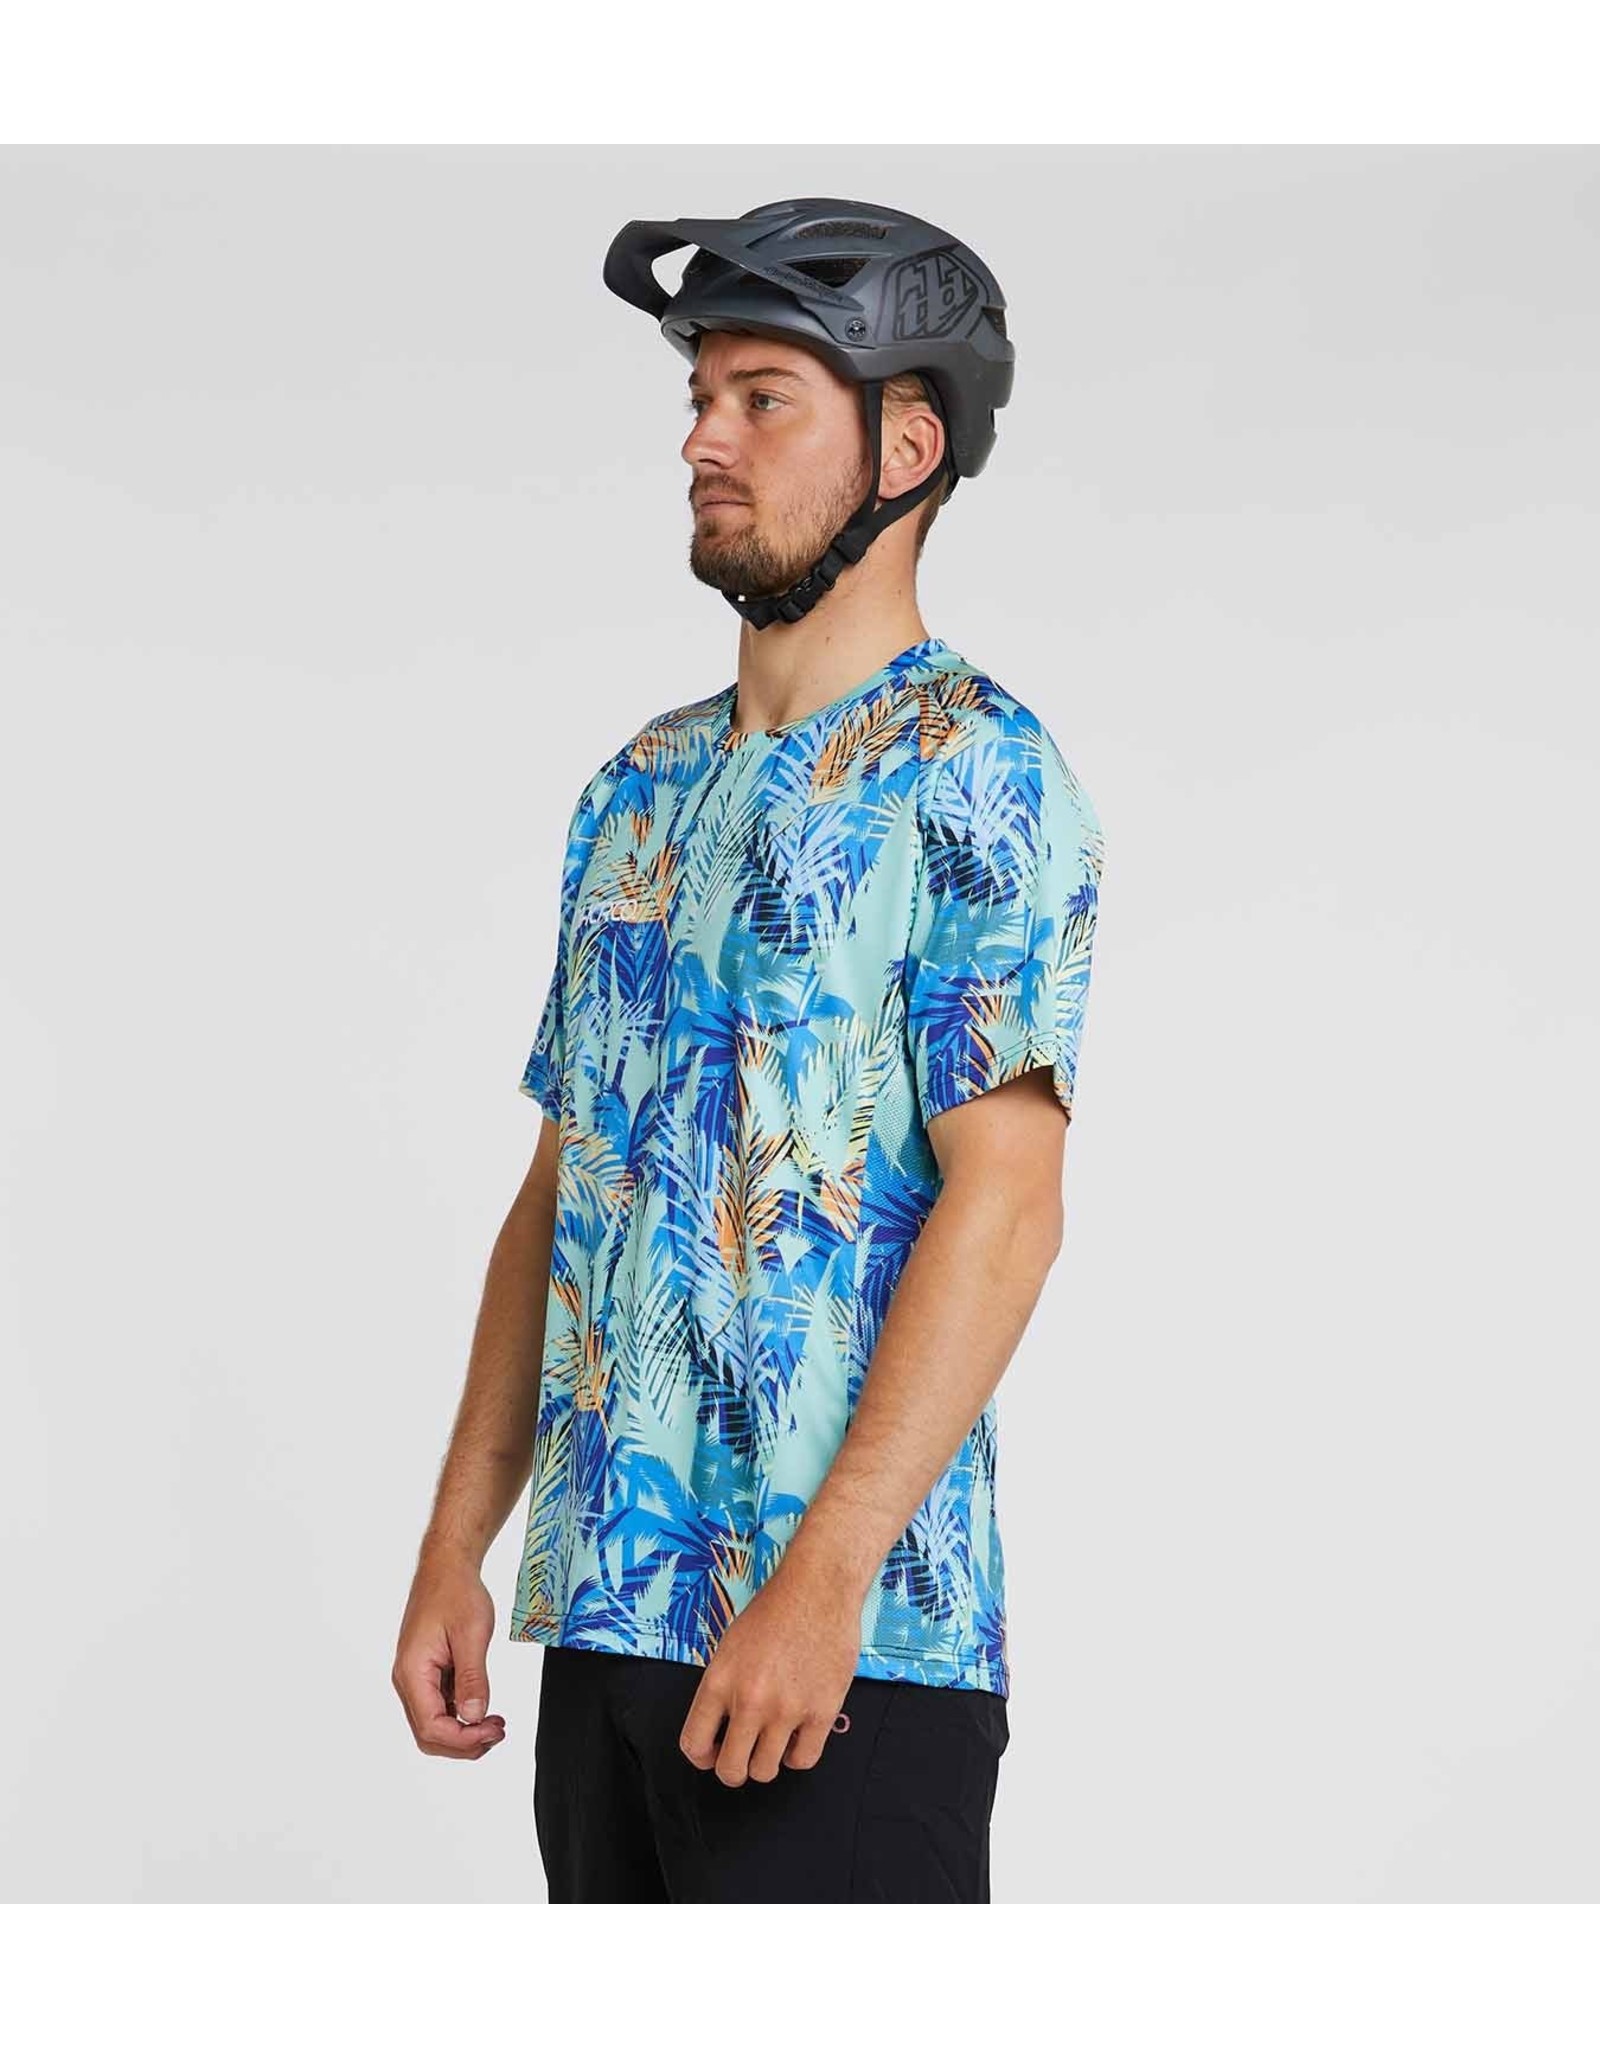 DHaRCO Dharco Men's SS Jersey